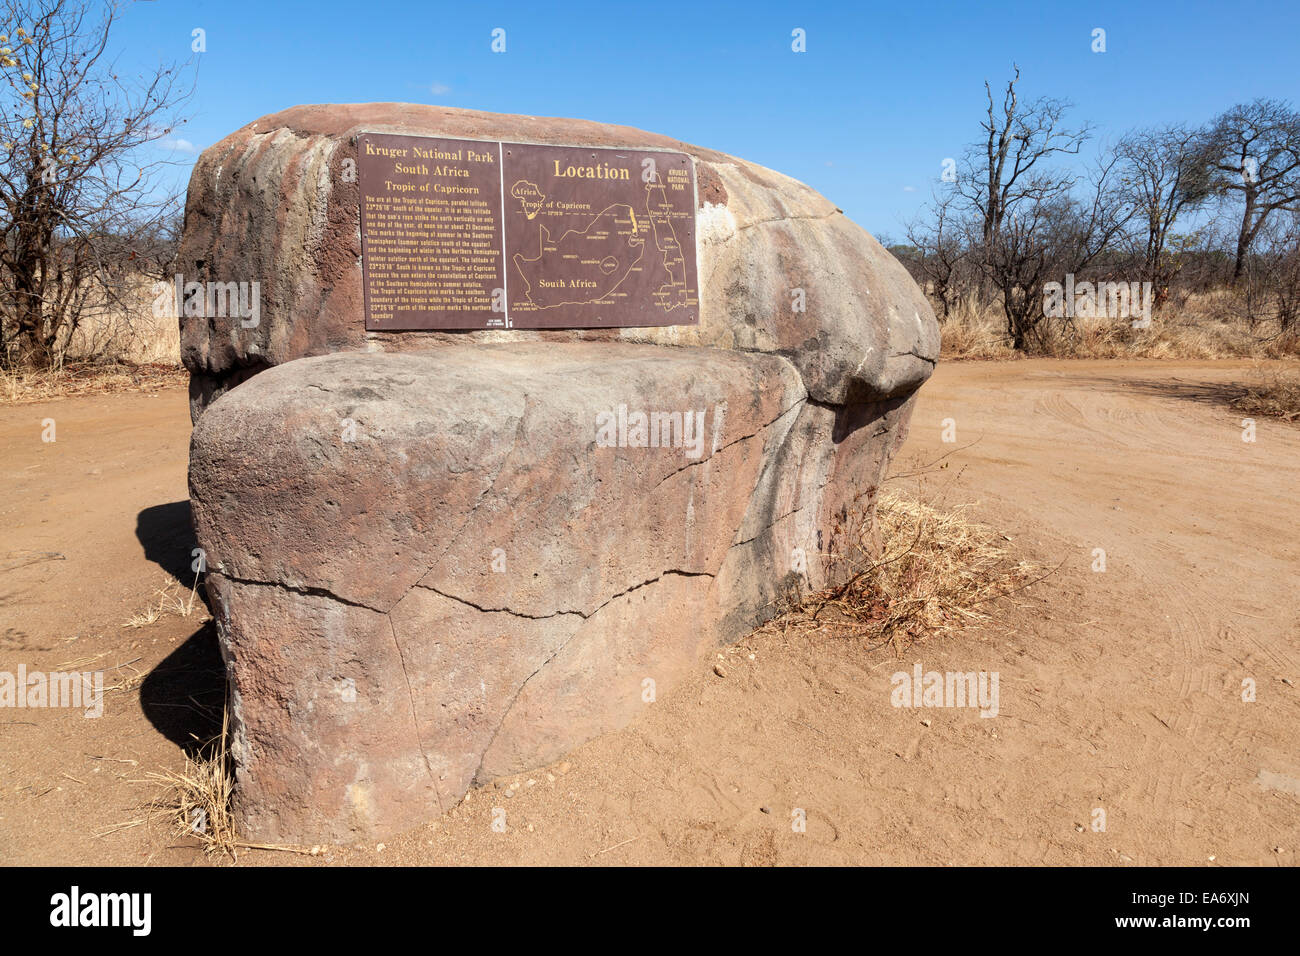 Tropic of Capricorn sign, Kruger national park, South Africa Stock Photo